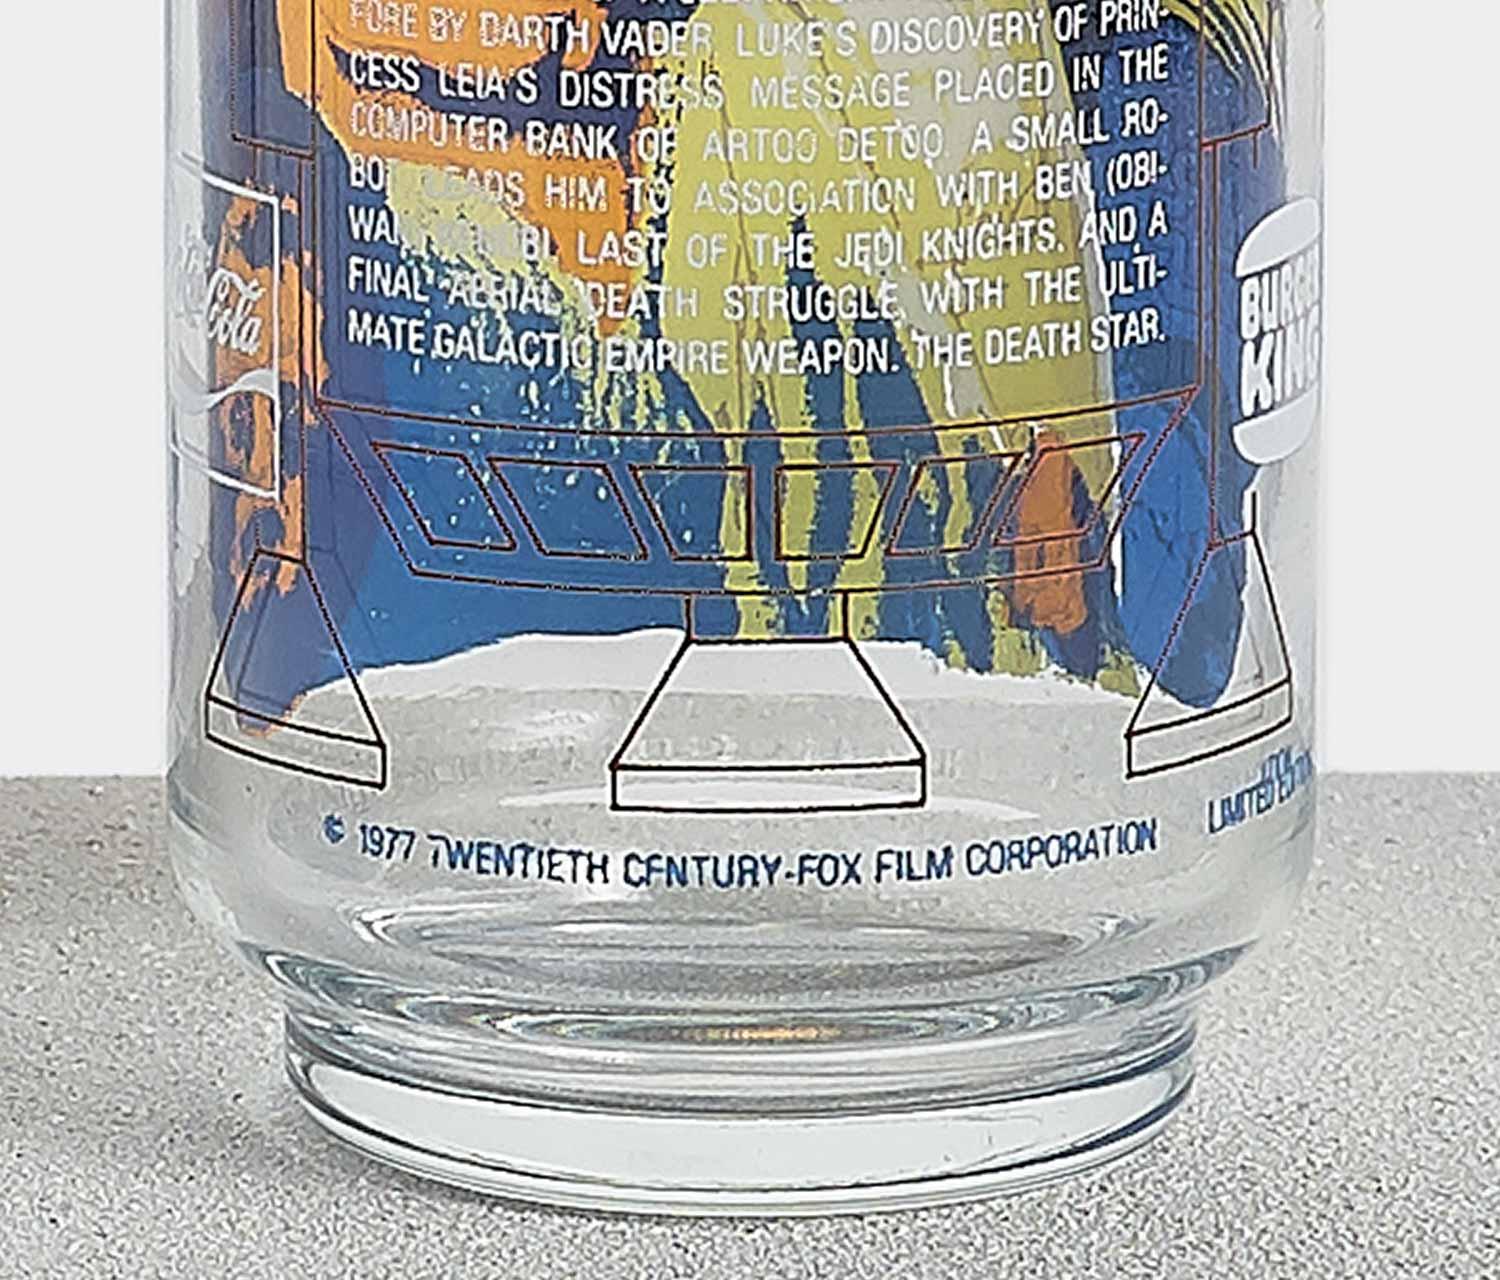 Vintage 1977 Burger King Star Wars 'A New Hope' Coca-cola Glasses All Set  Glasses Available FREE SHIPPING 